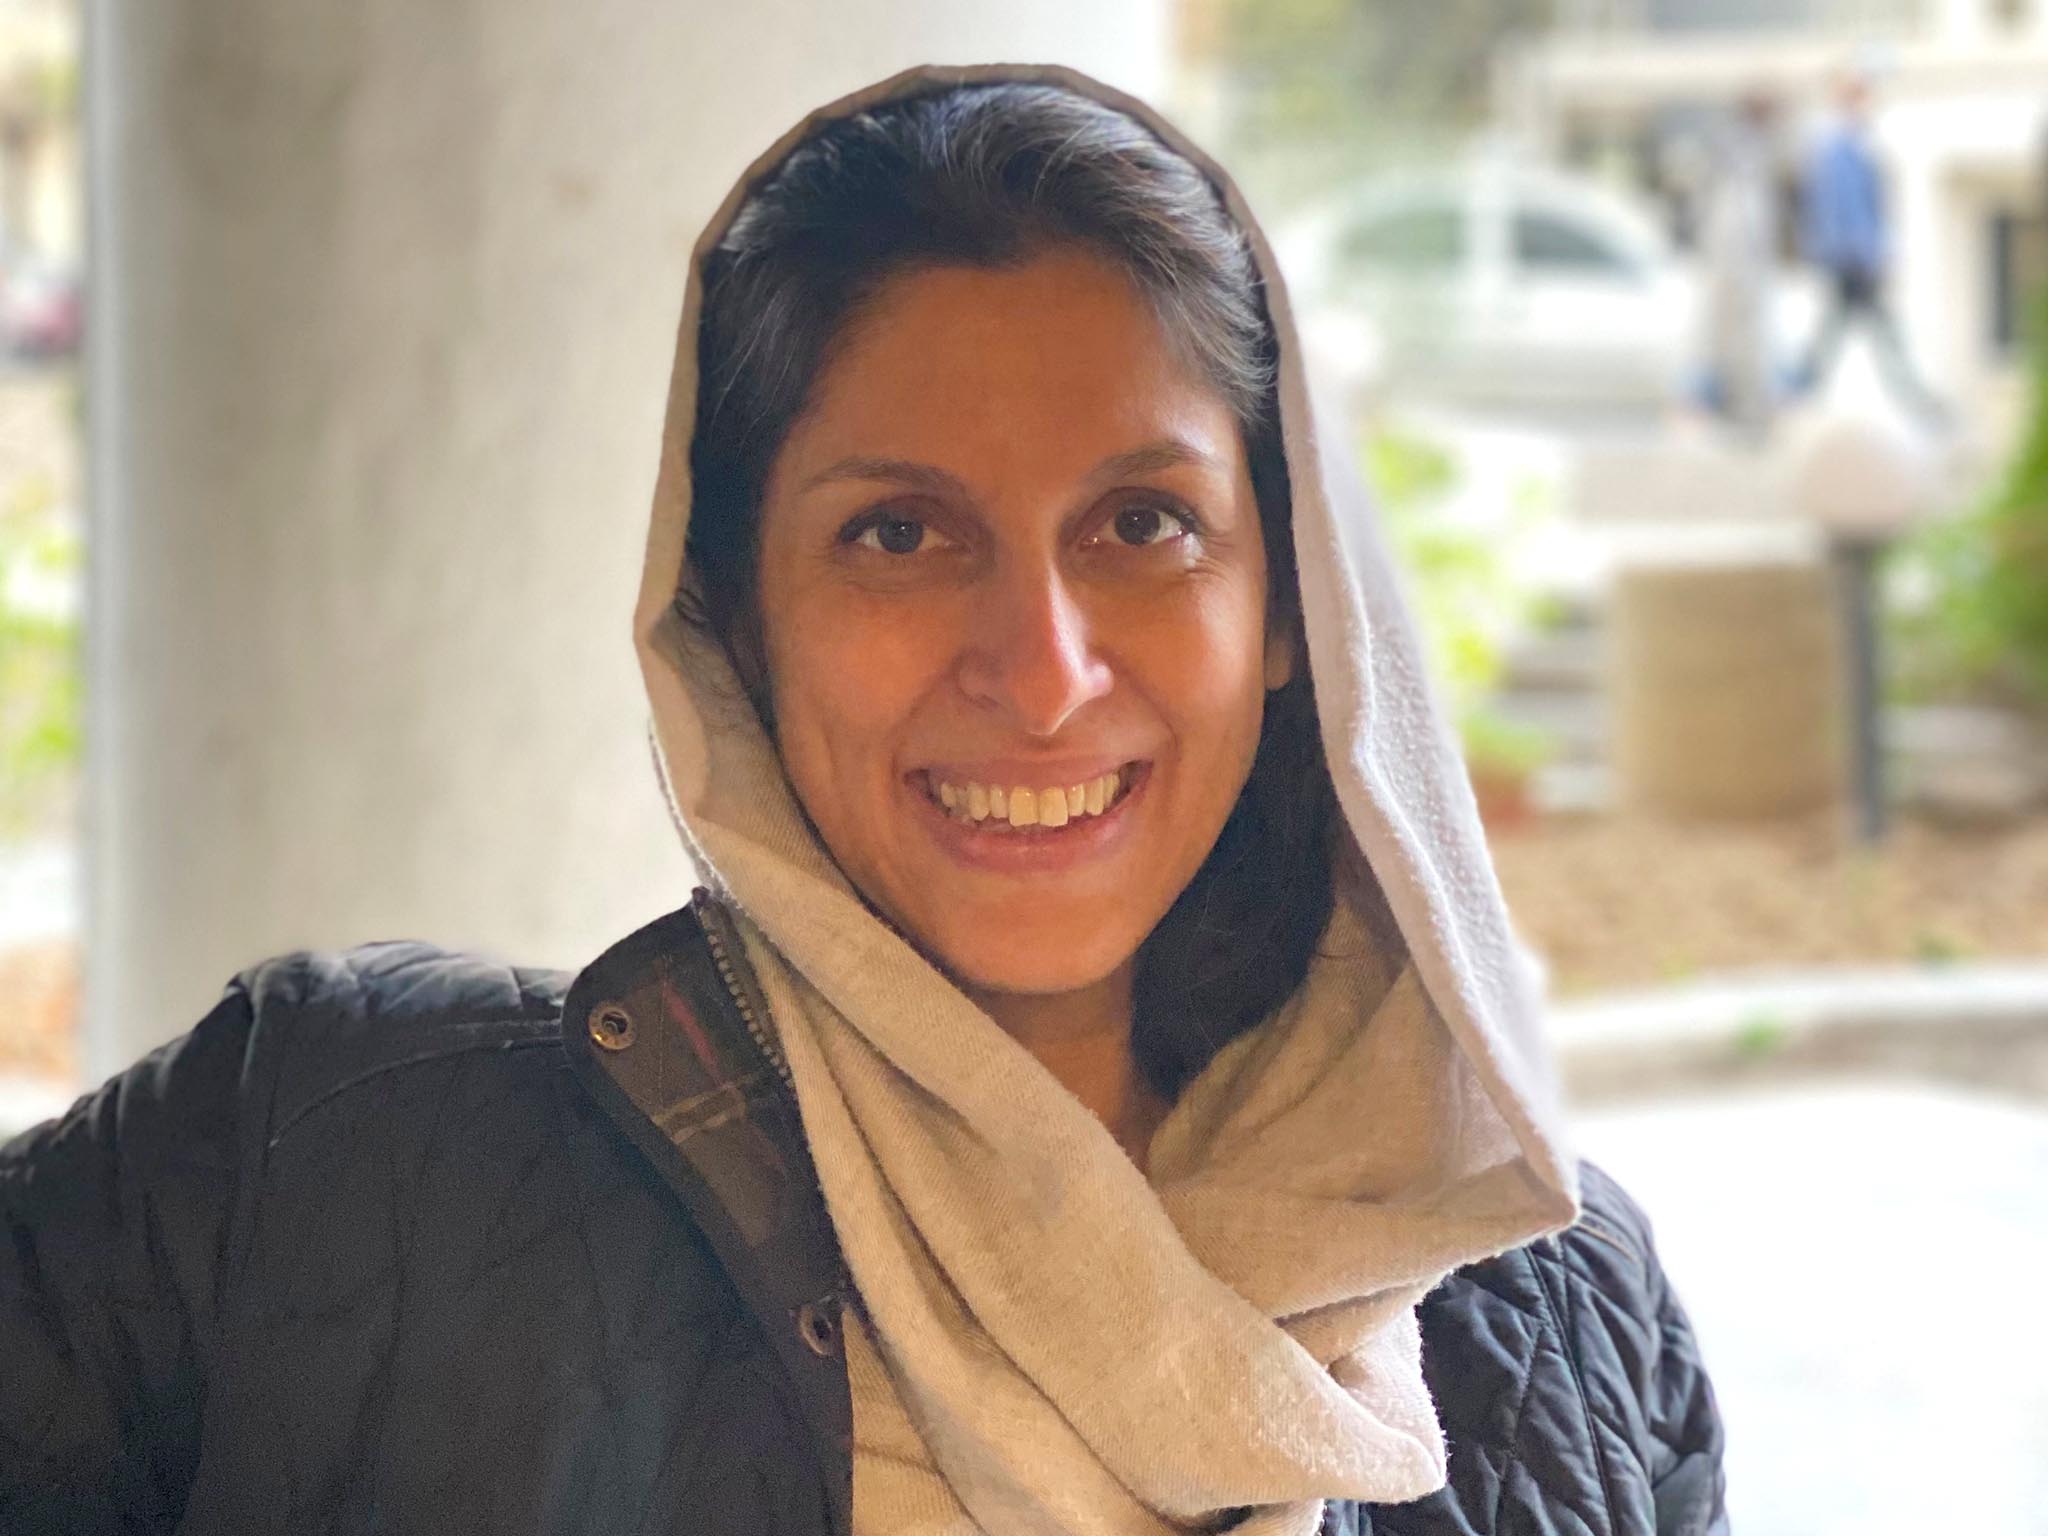 Ms Zaghari-Ratcliffe was first detained in 2016